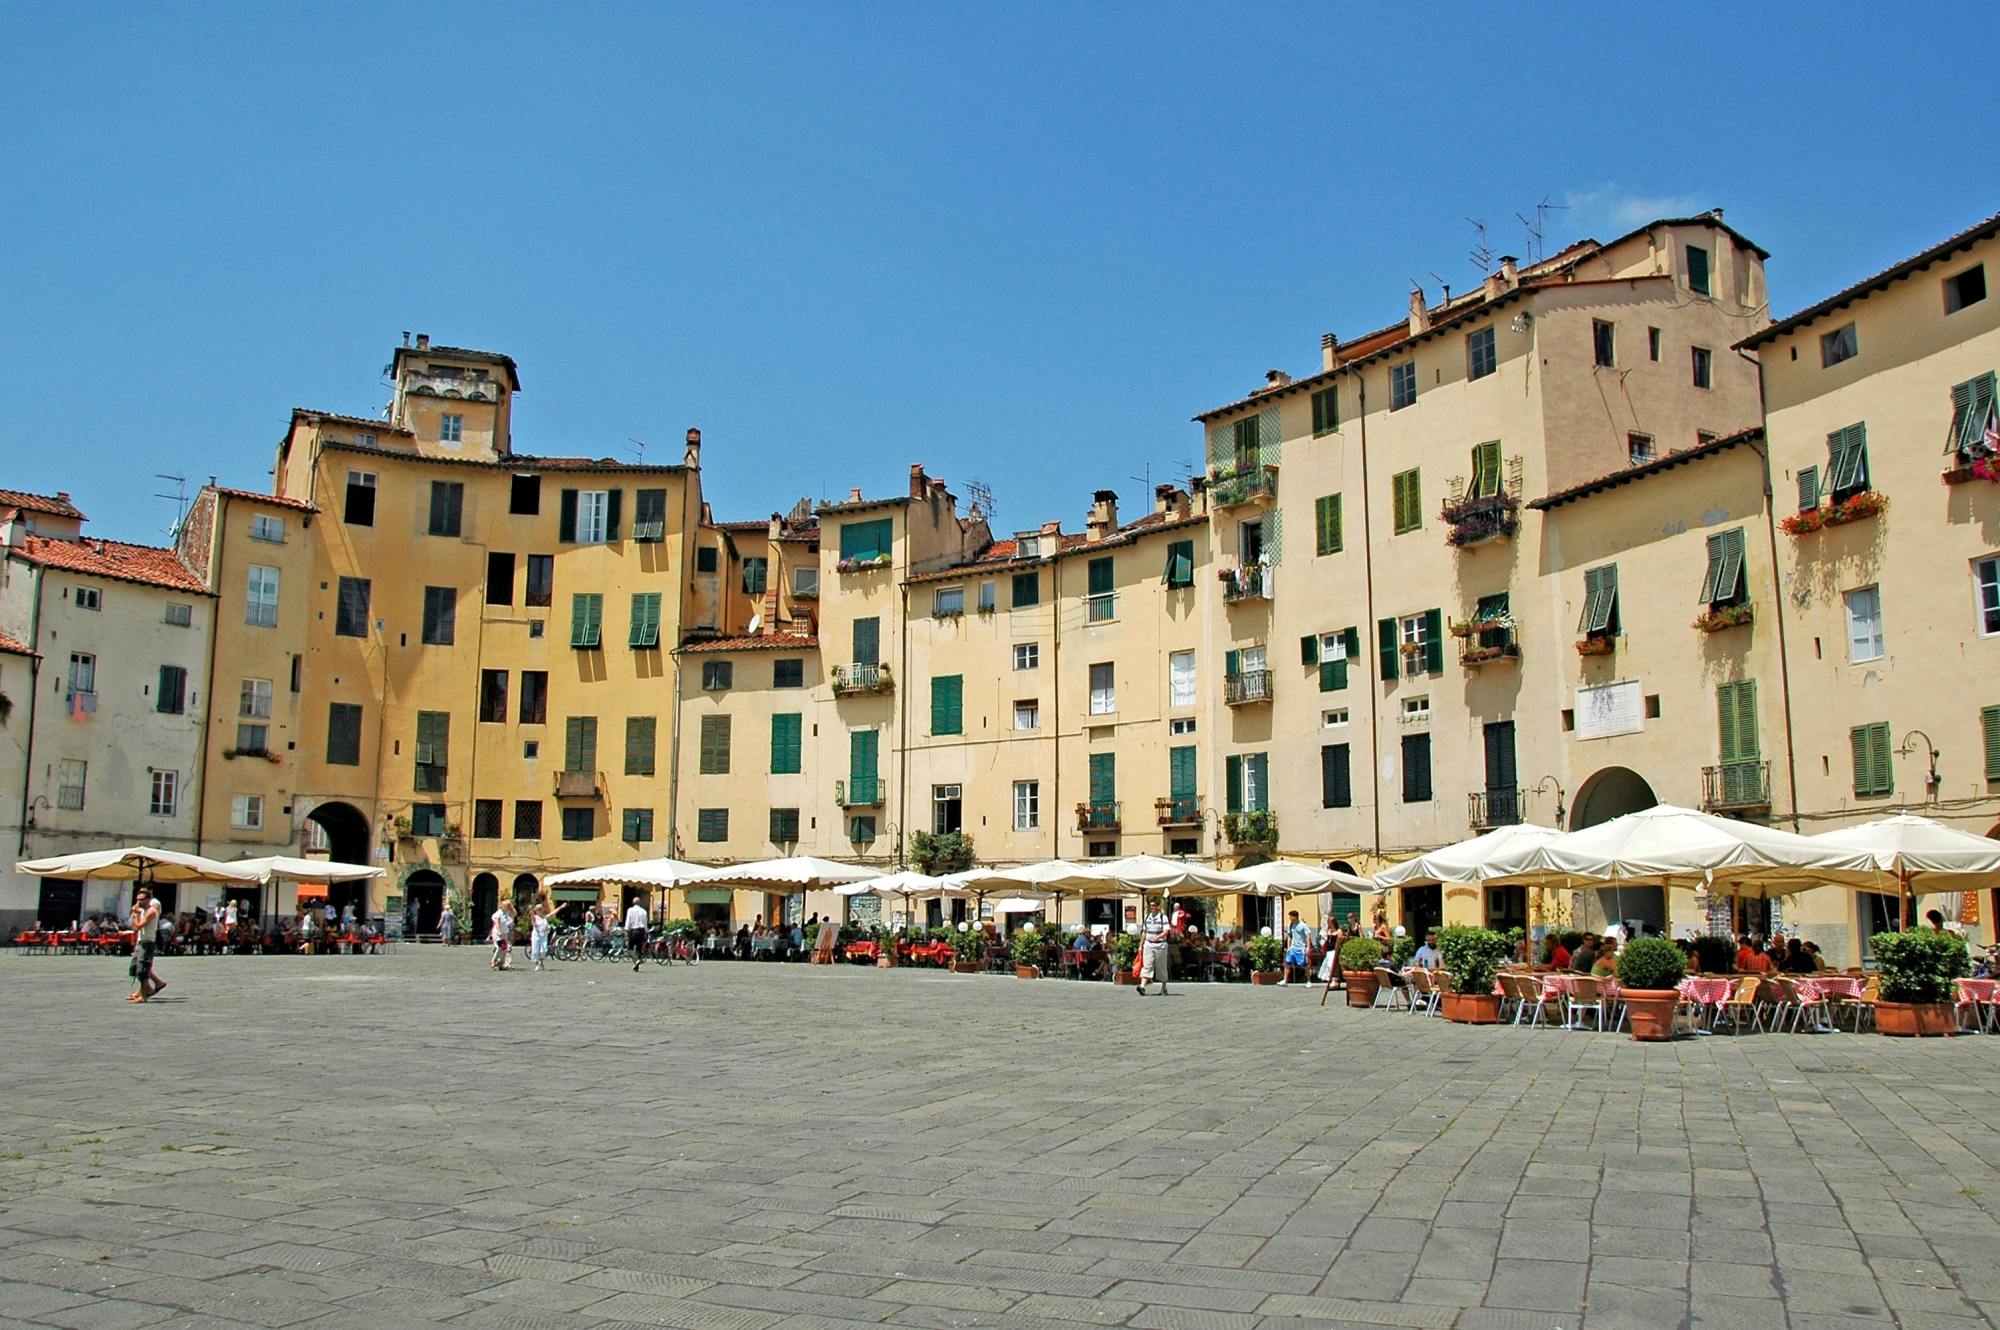 Full-day Pisa and Lucca tour from La Spezia Musement